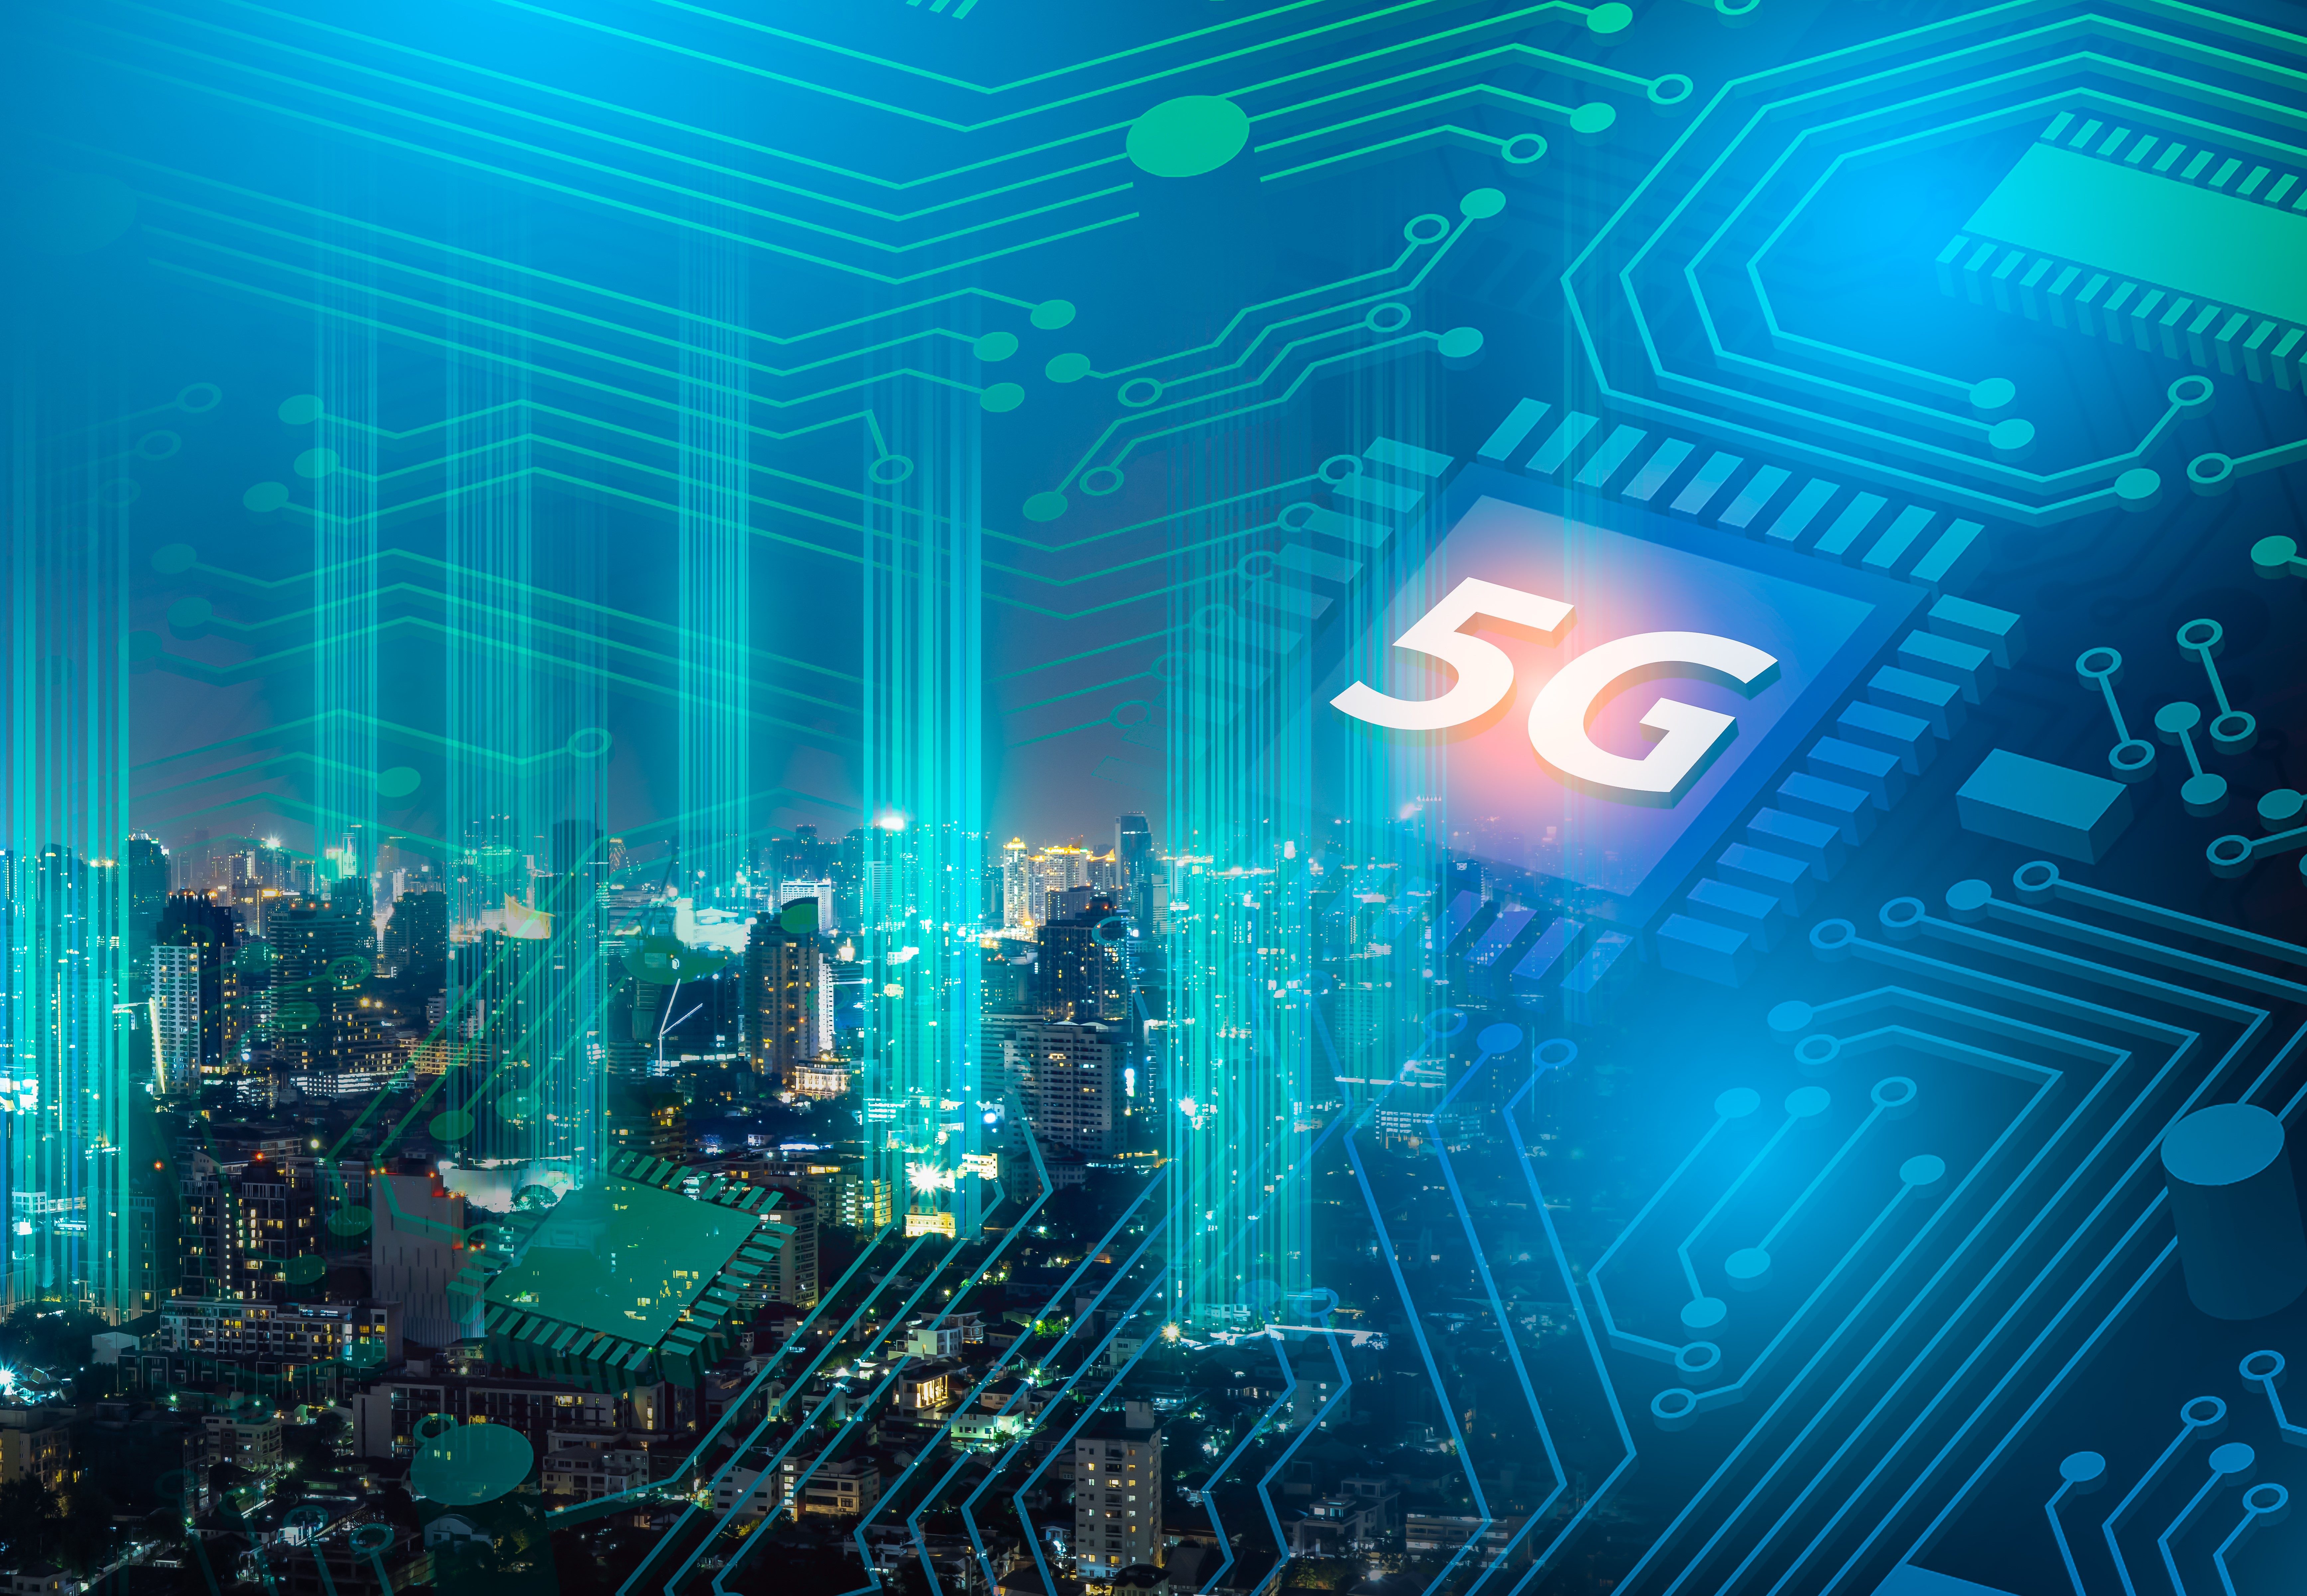 Smart 5G is ‘nearly twice as fast’ as competitor, according to Ookla® report